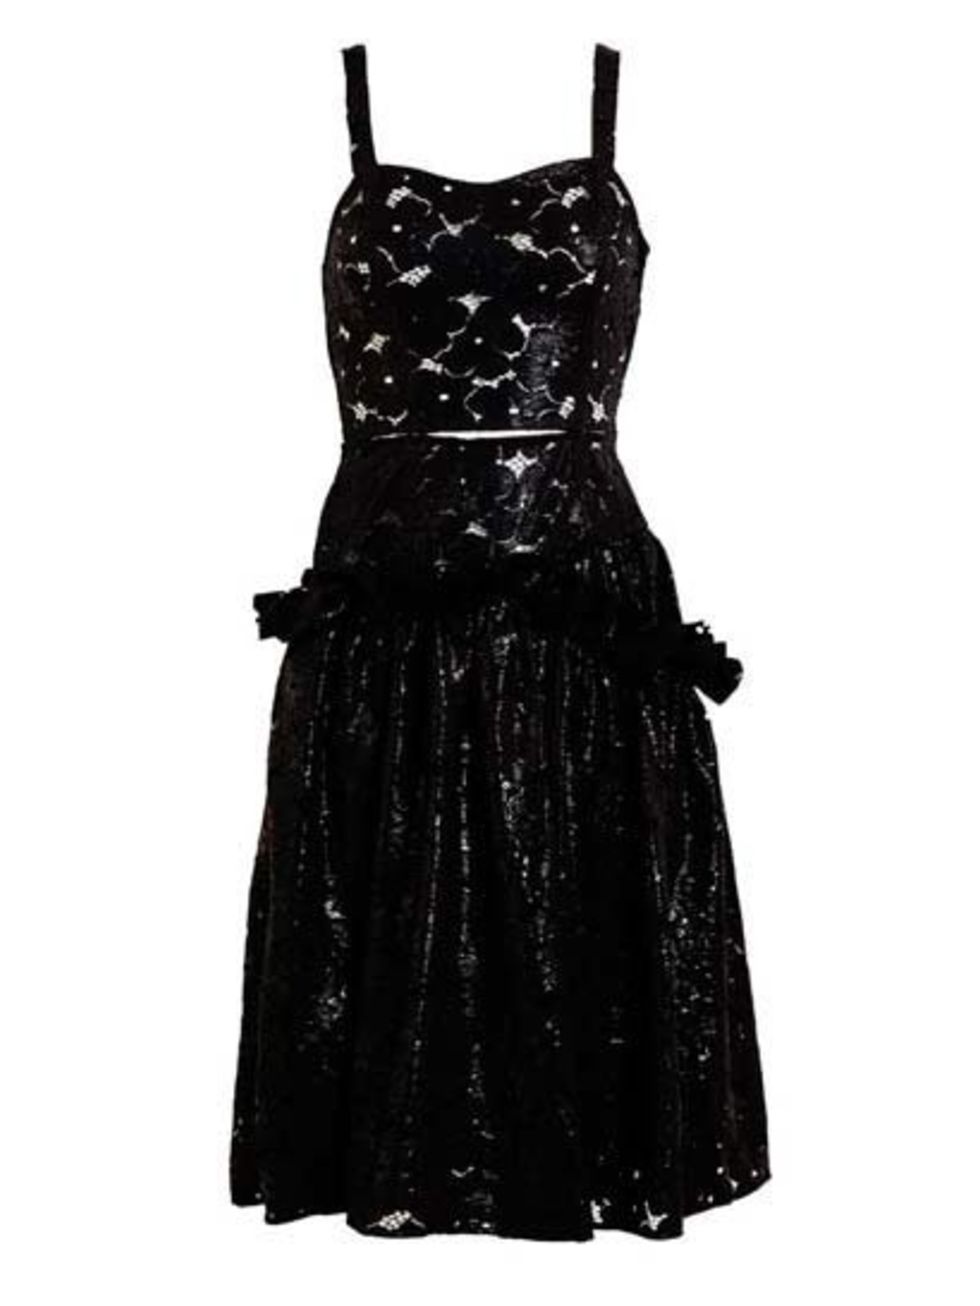 <p>Boned black floral lace dress with wet-look coating, and a defined waist with cut-out detailing. This showpiece dress is £1,260 at <a href="http://www.brownsfashion.com/product/038S09740007/027/wet-floral-lace-dress">Browns</a>.</p>